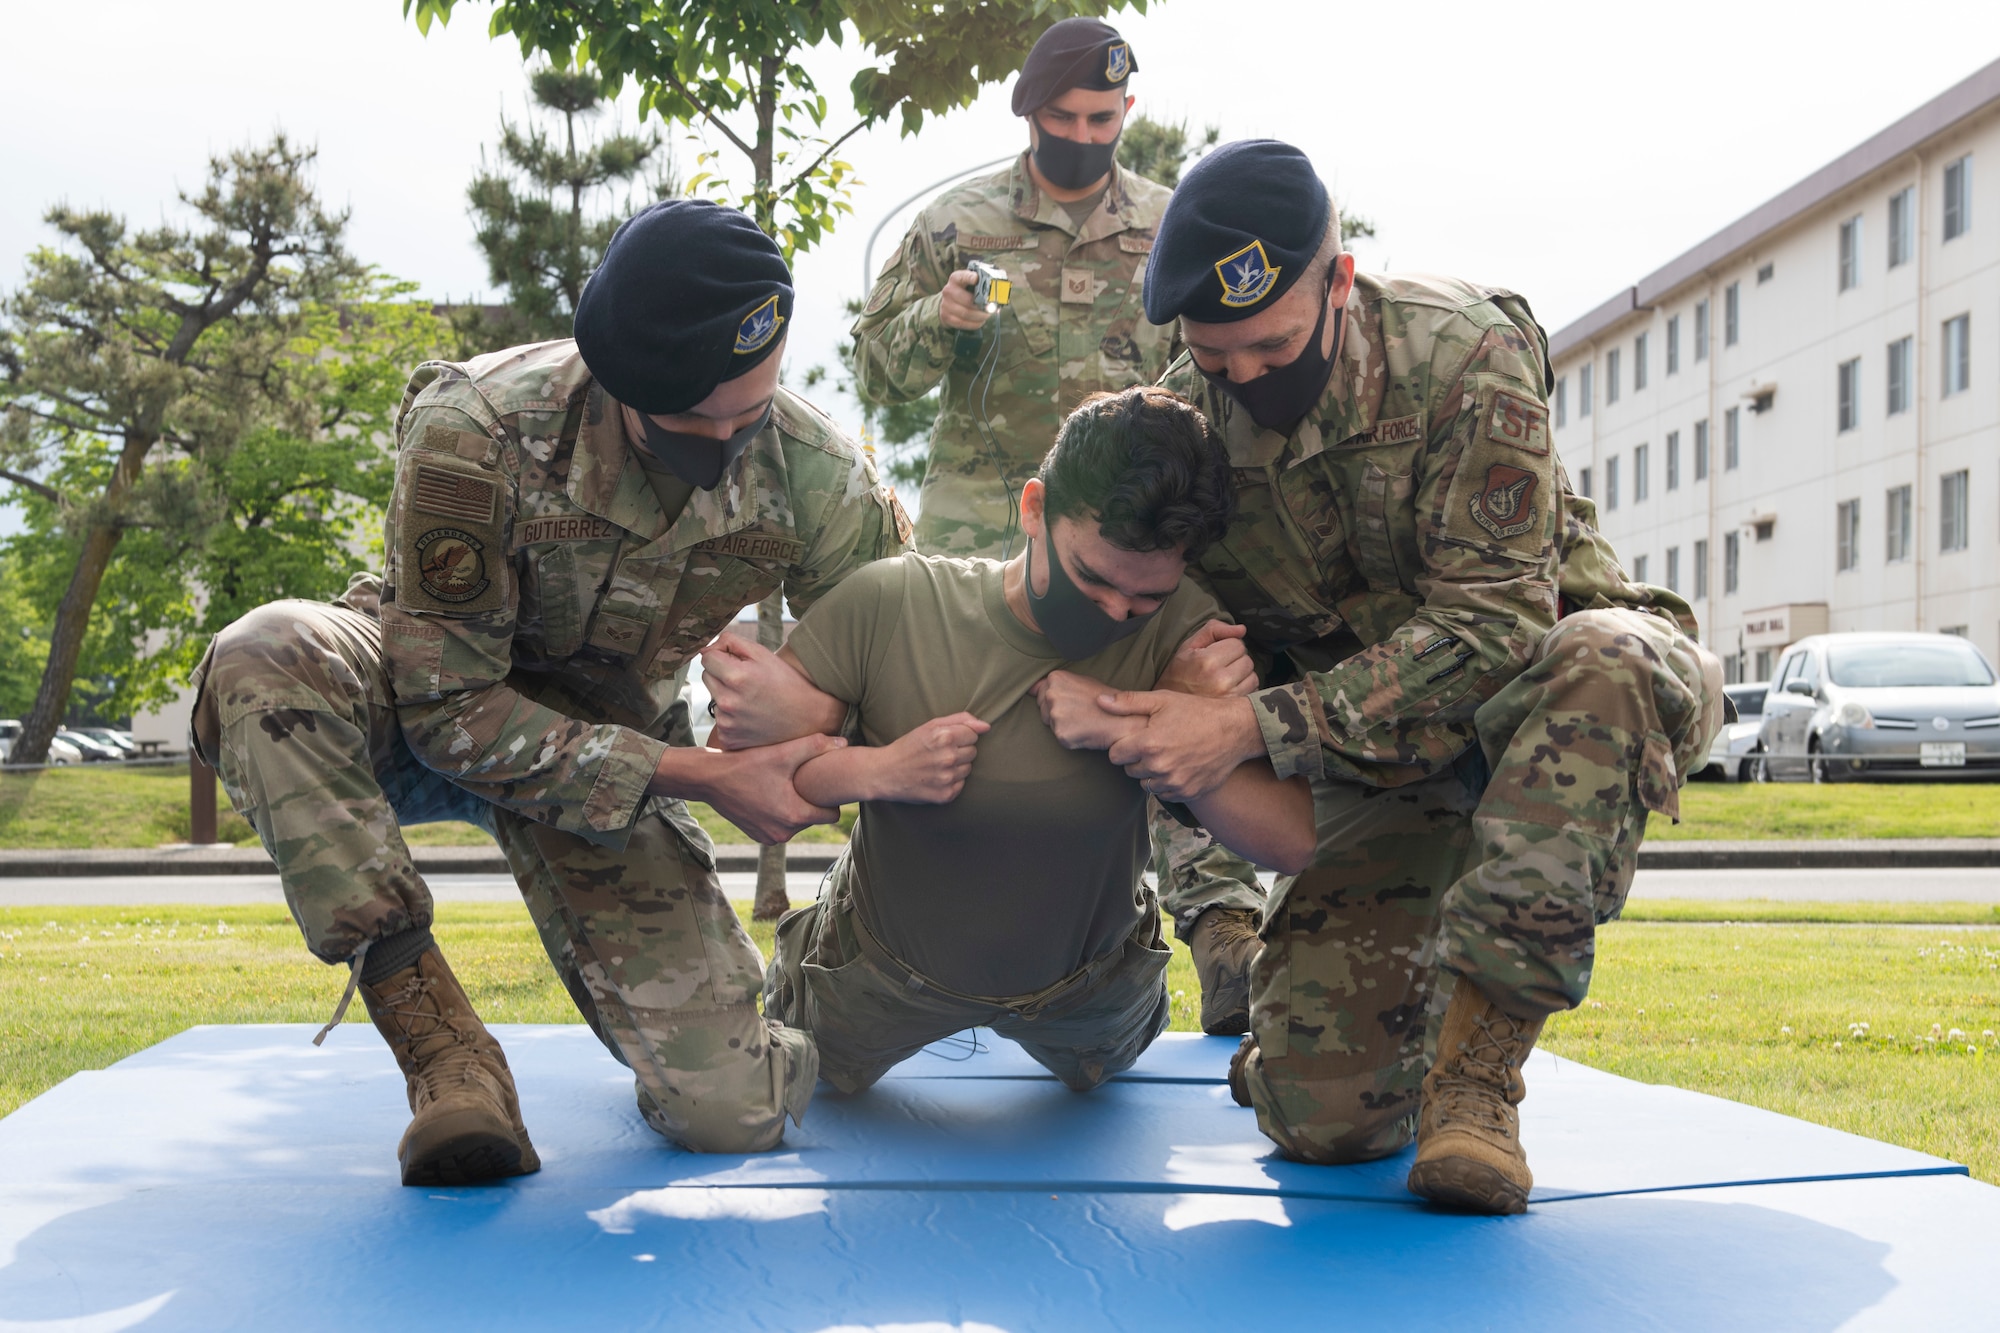 Airman 1st Class Savannah Trevino, 374th Security Forces Squadron Security Response Team member, middle, gets tased at the “Day in the Life” event during National Police Week at Yokota Air Base, Japan, May 11, 2021.  The SFS allowed volunteers to get tased as an educational tool of the effects it has to the body. (U.S. Air Force photo by Staff Sgt. Joshua Edwards)